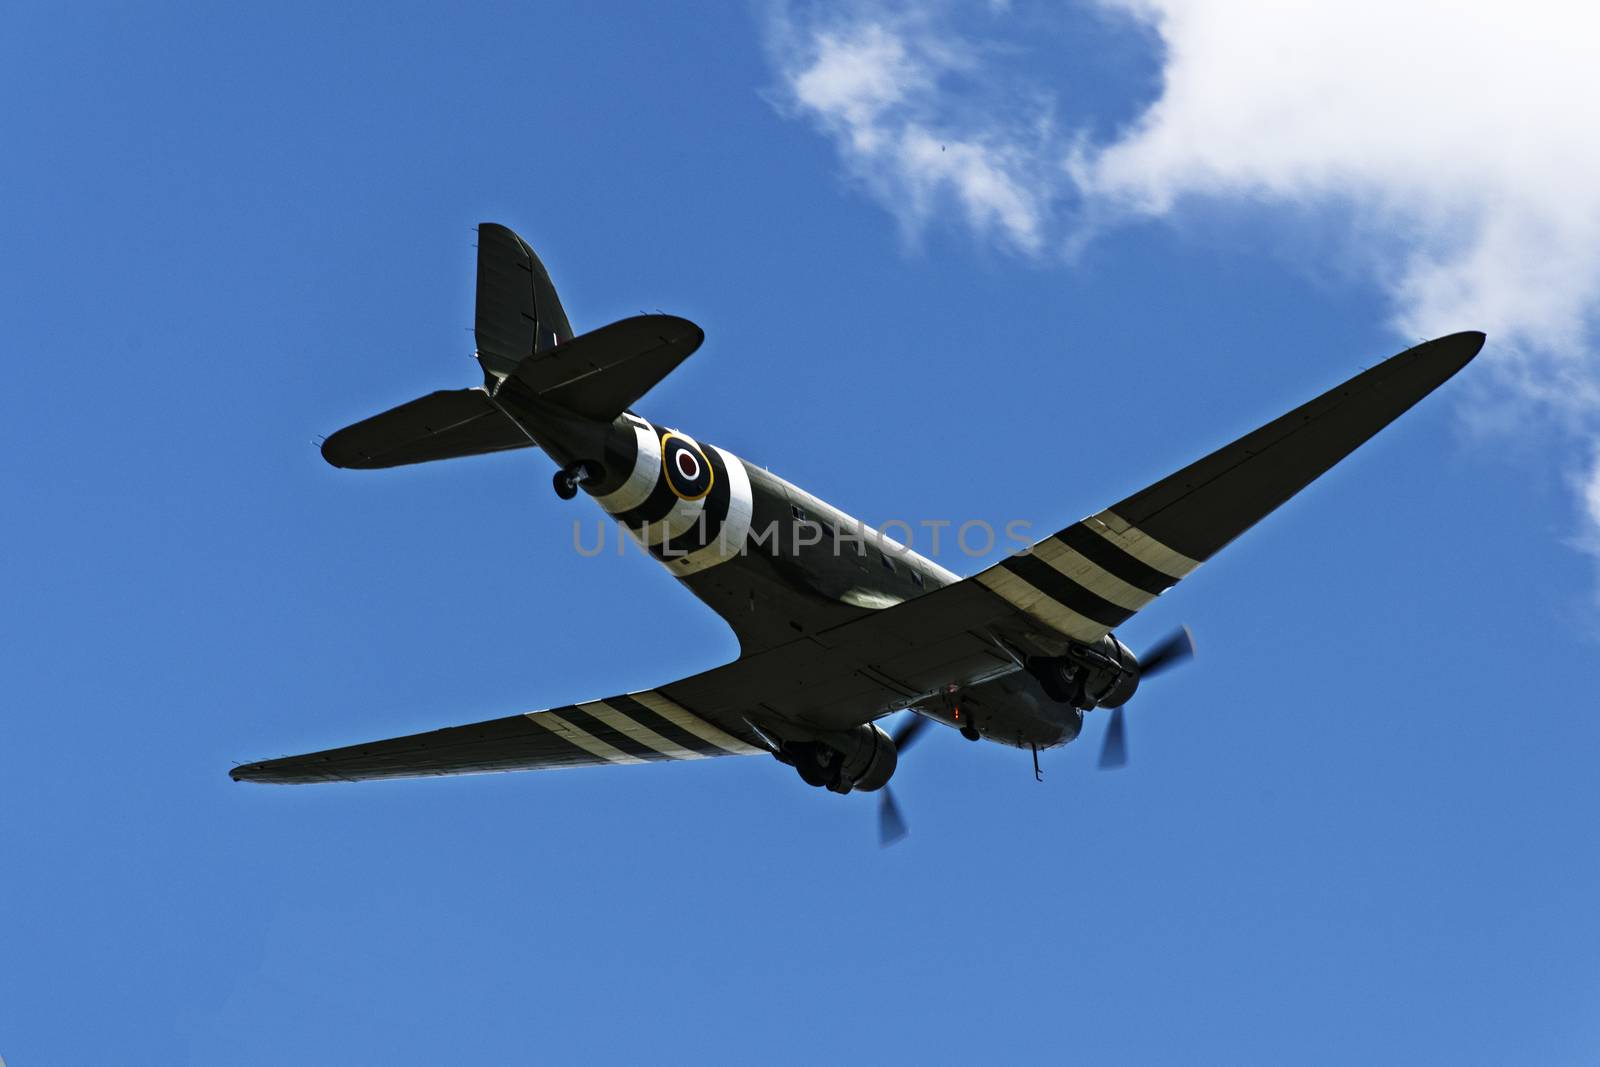 UK, Quorn - June 2015: Spitfire in the skies over Brittain